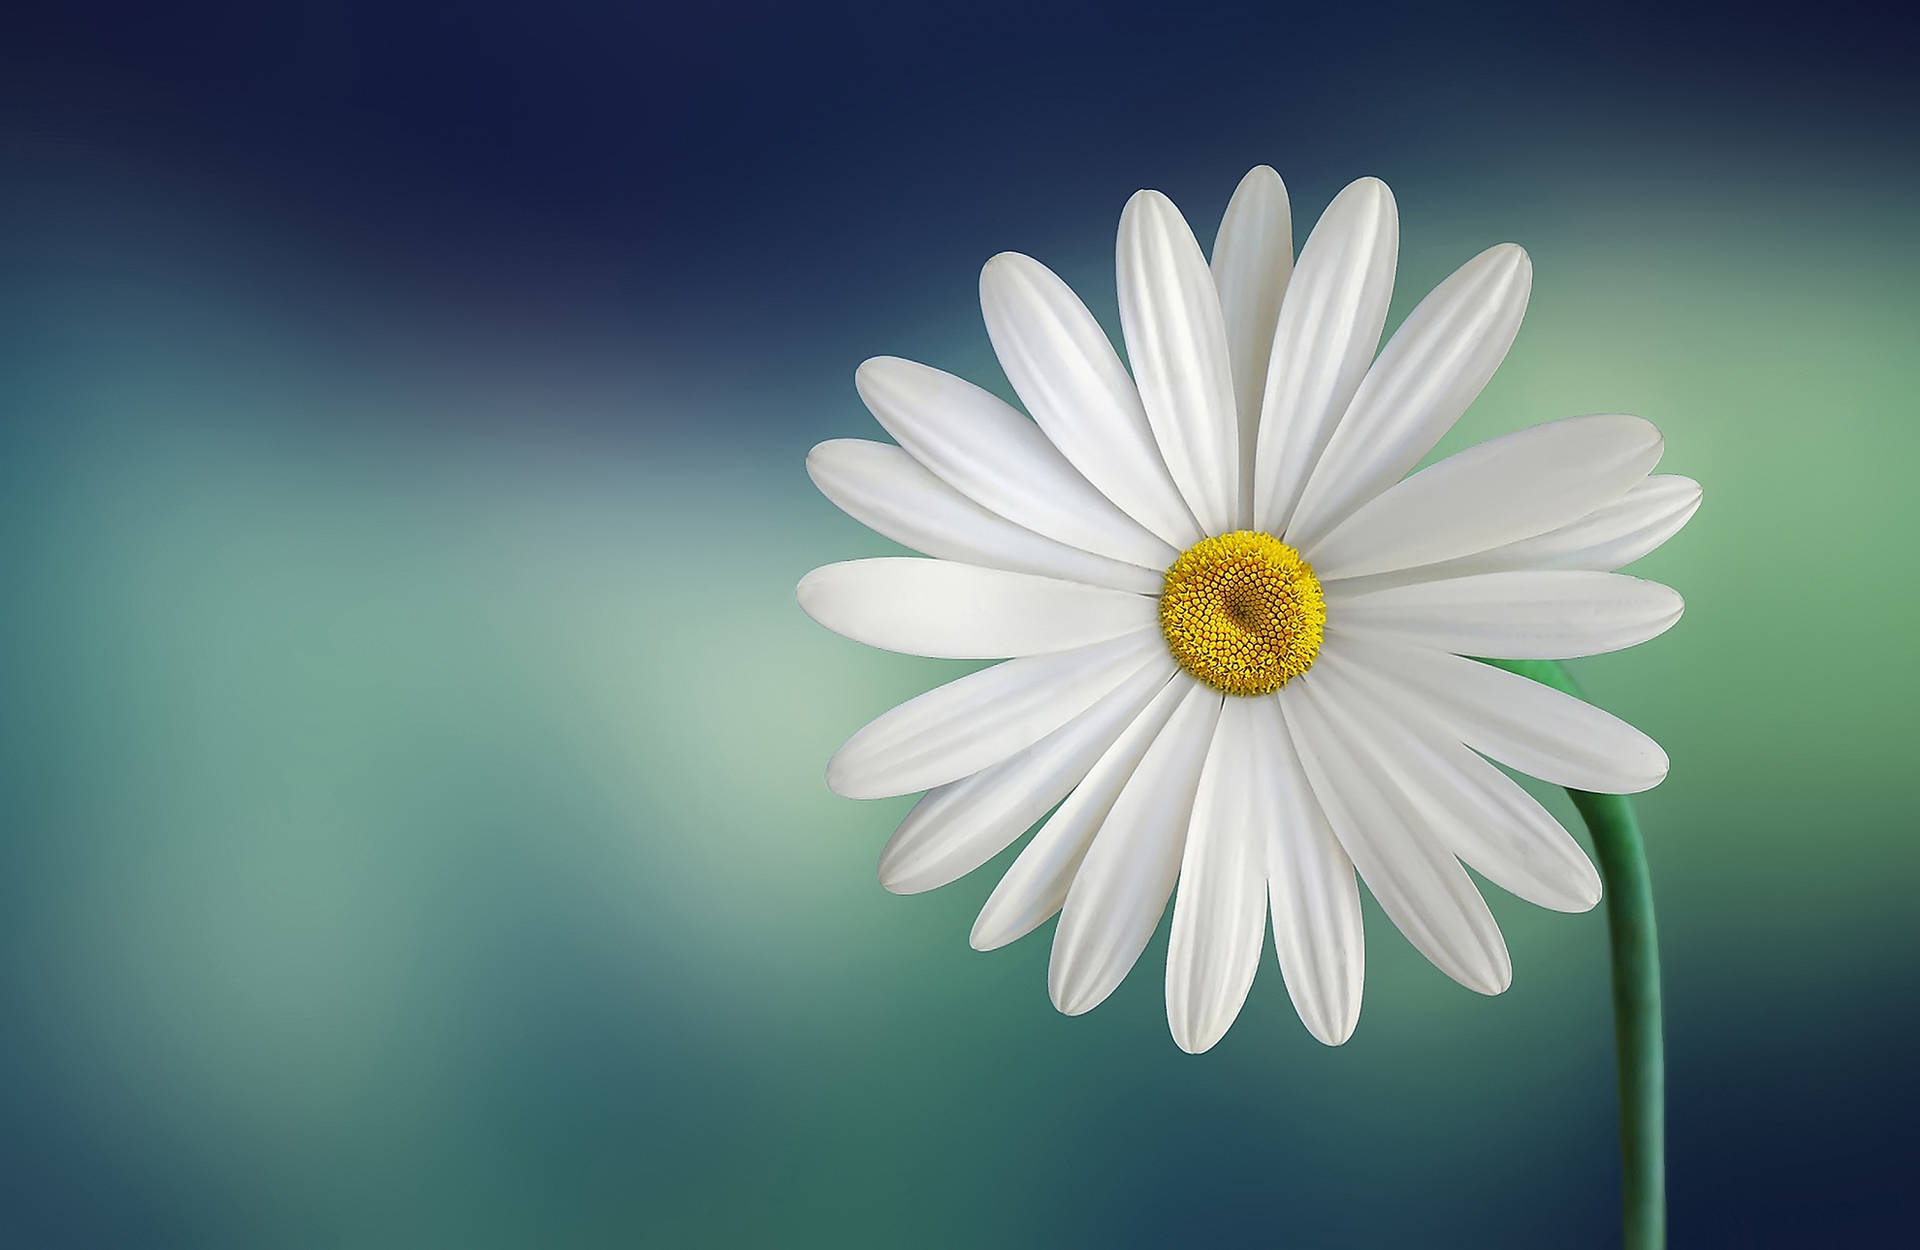 Daisy With Small Disc 4k Wallpaper